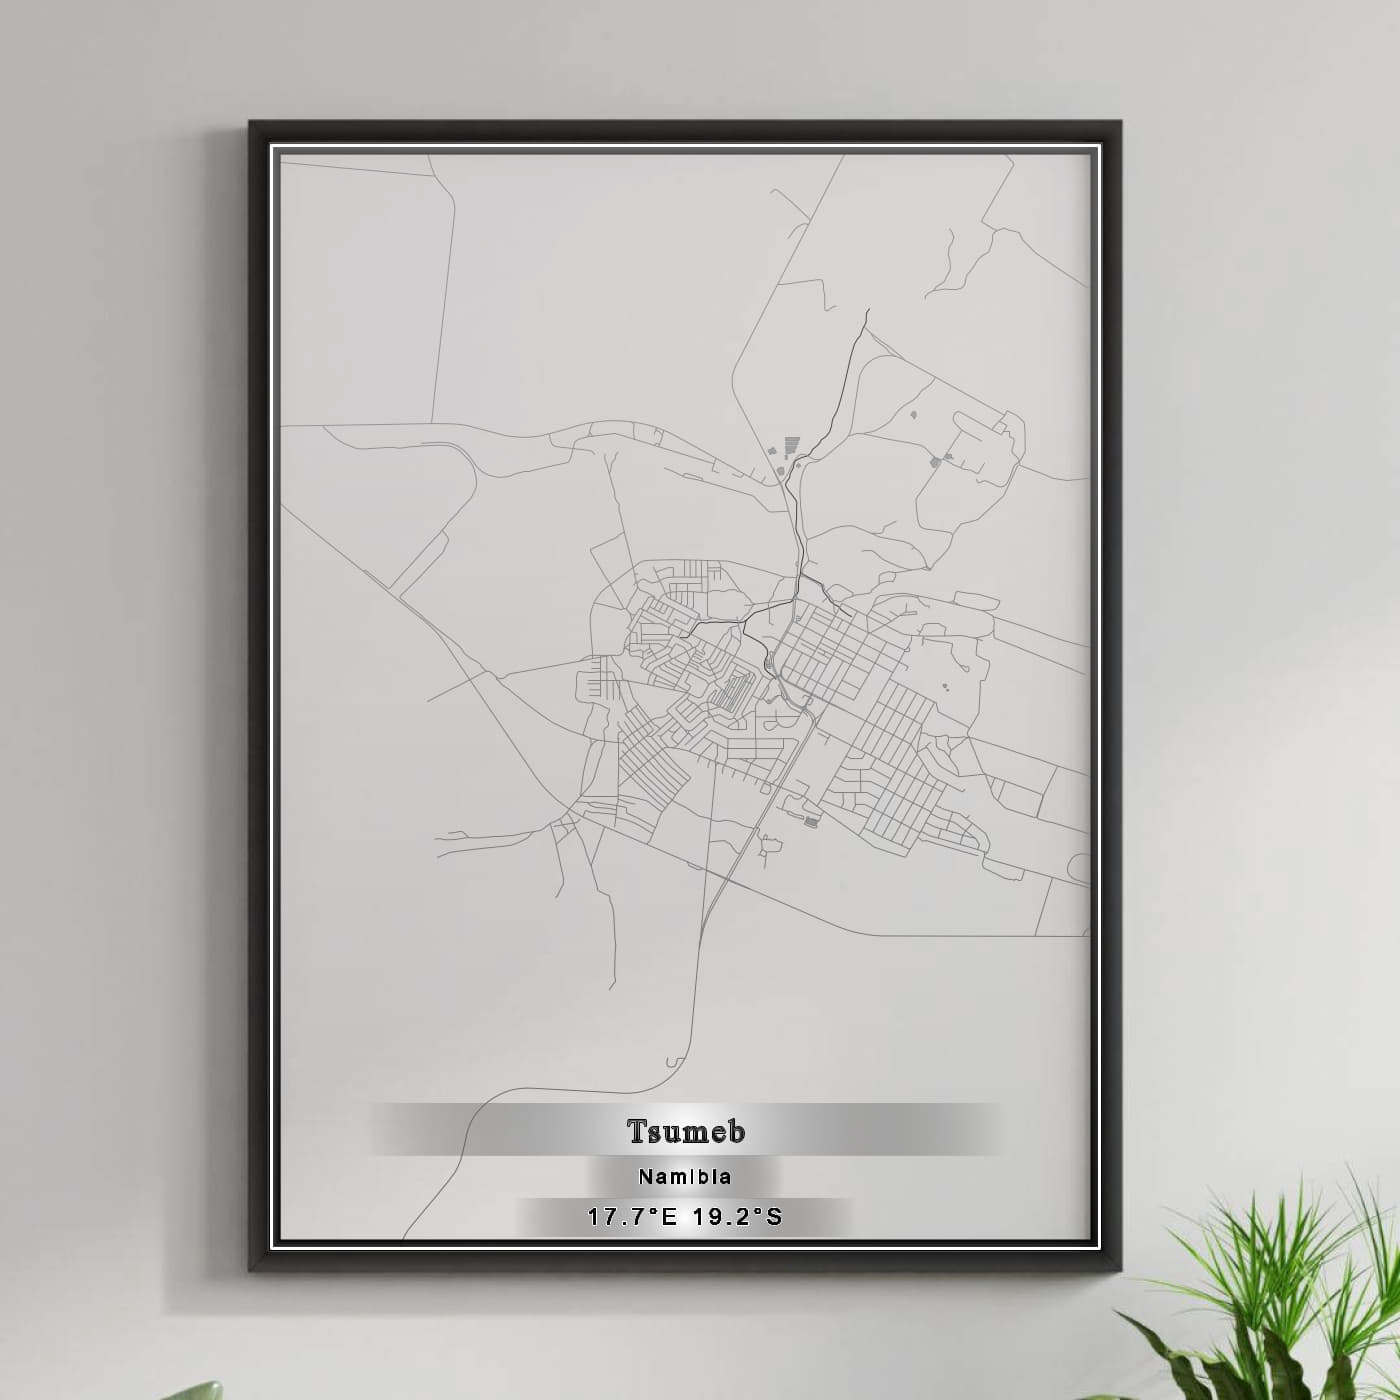 ROAD MAP OF TSUMEB, NAMIBIA BY MAPBAKES